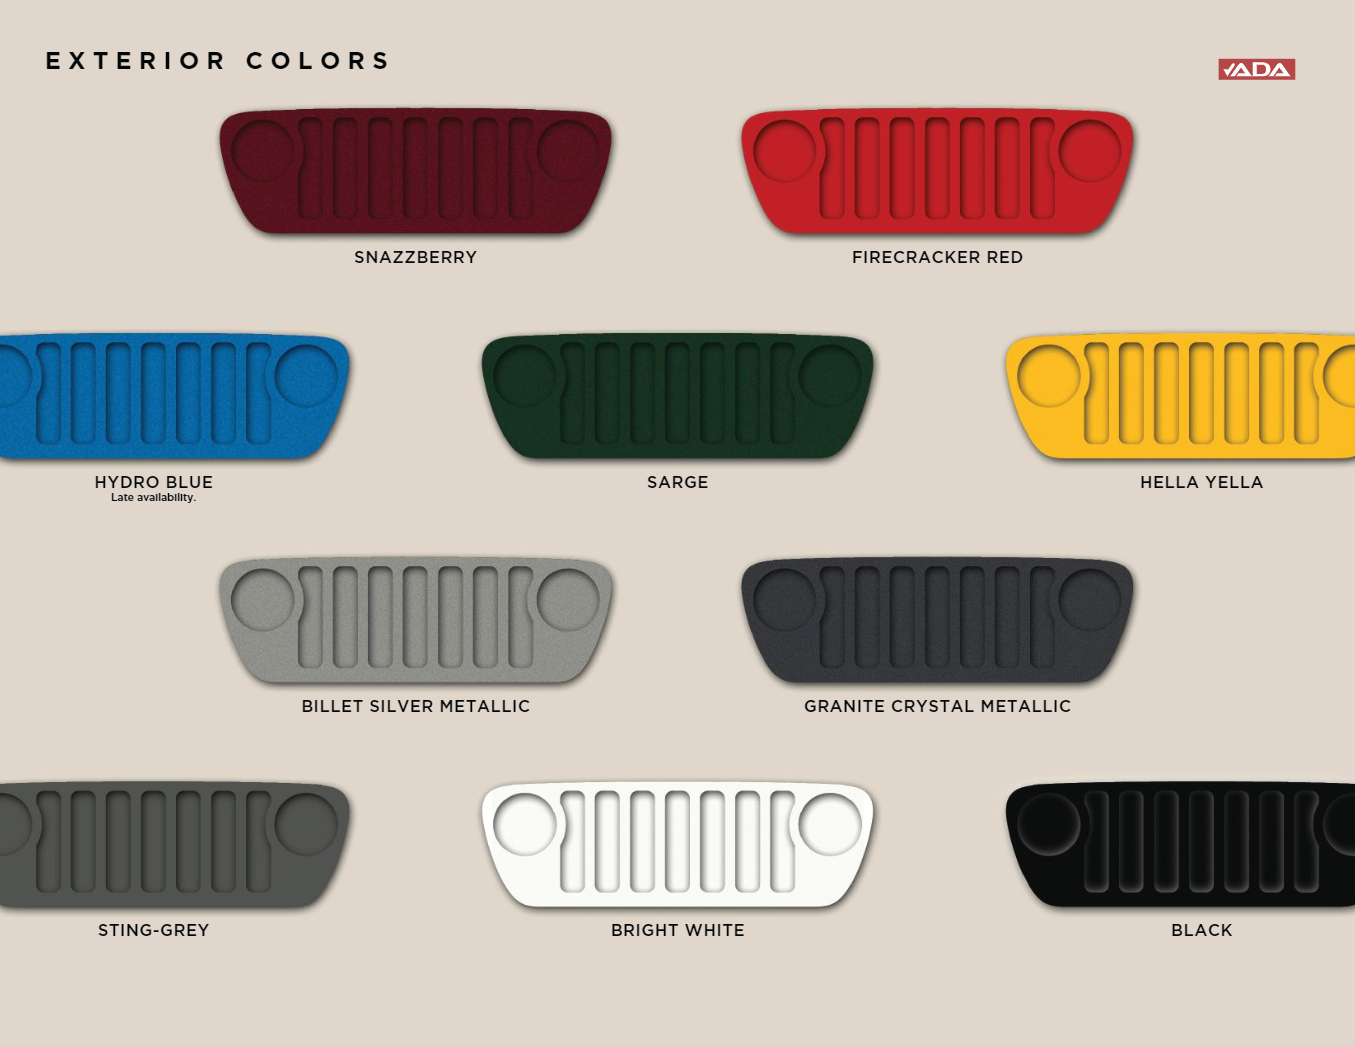 Various Colors used on the exterior of the Jeep Wrangler